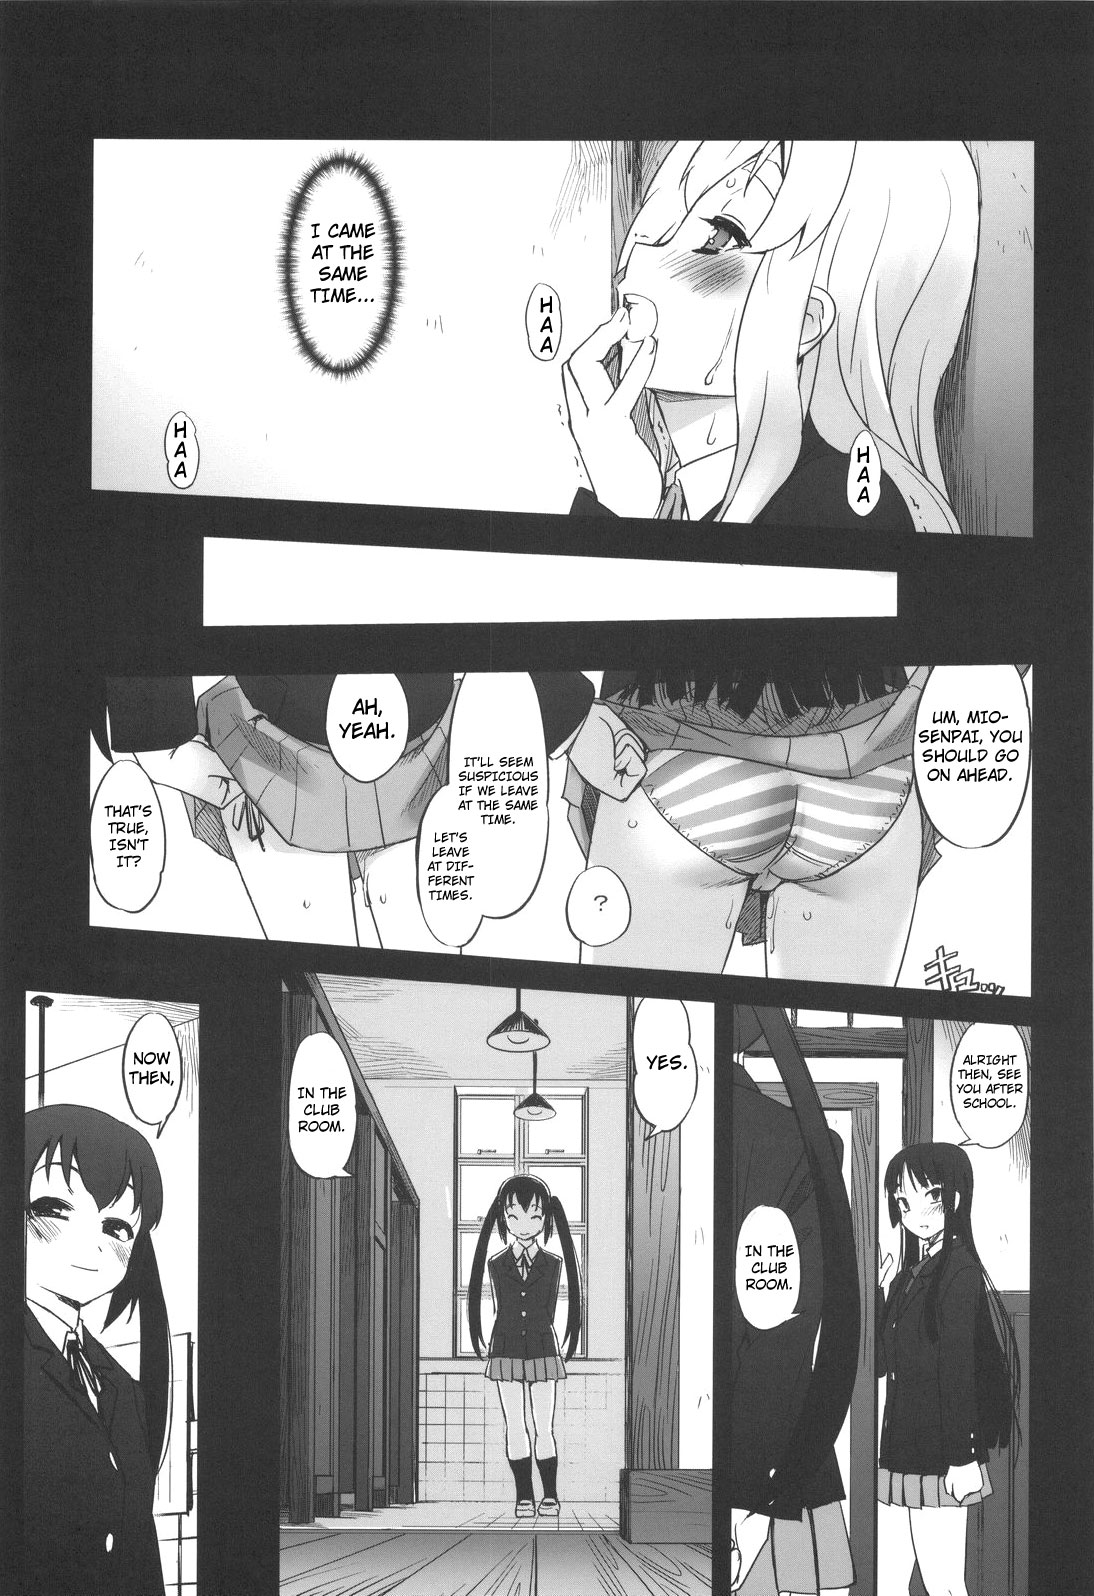 (C76) [G-Power! (Sasayuki)] Nekomimi to Toilet to Houkago no Bushitsu | Cat Ears And A Restroom And The Club Room After School (K-ON) [English] [Nicchiscans-4Dawgz] page 16 full